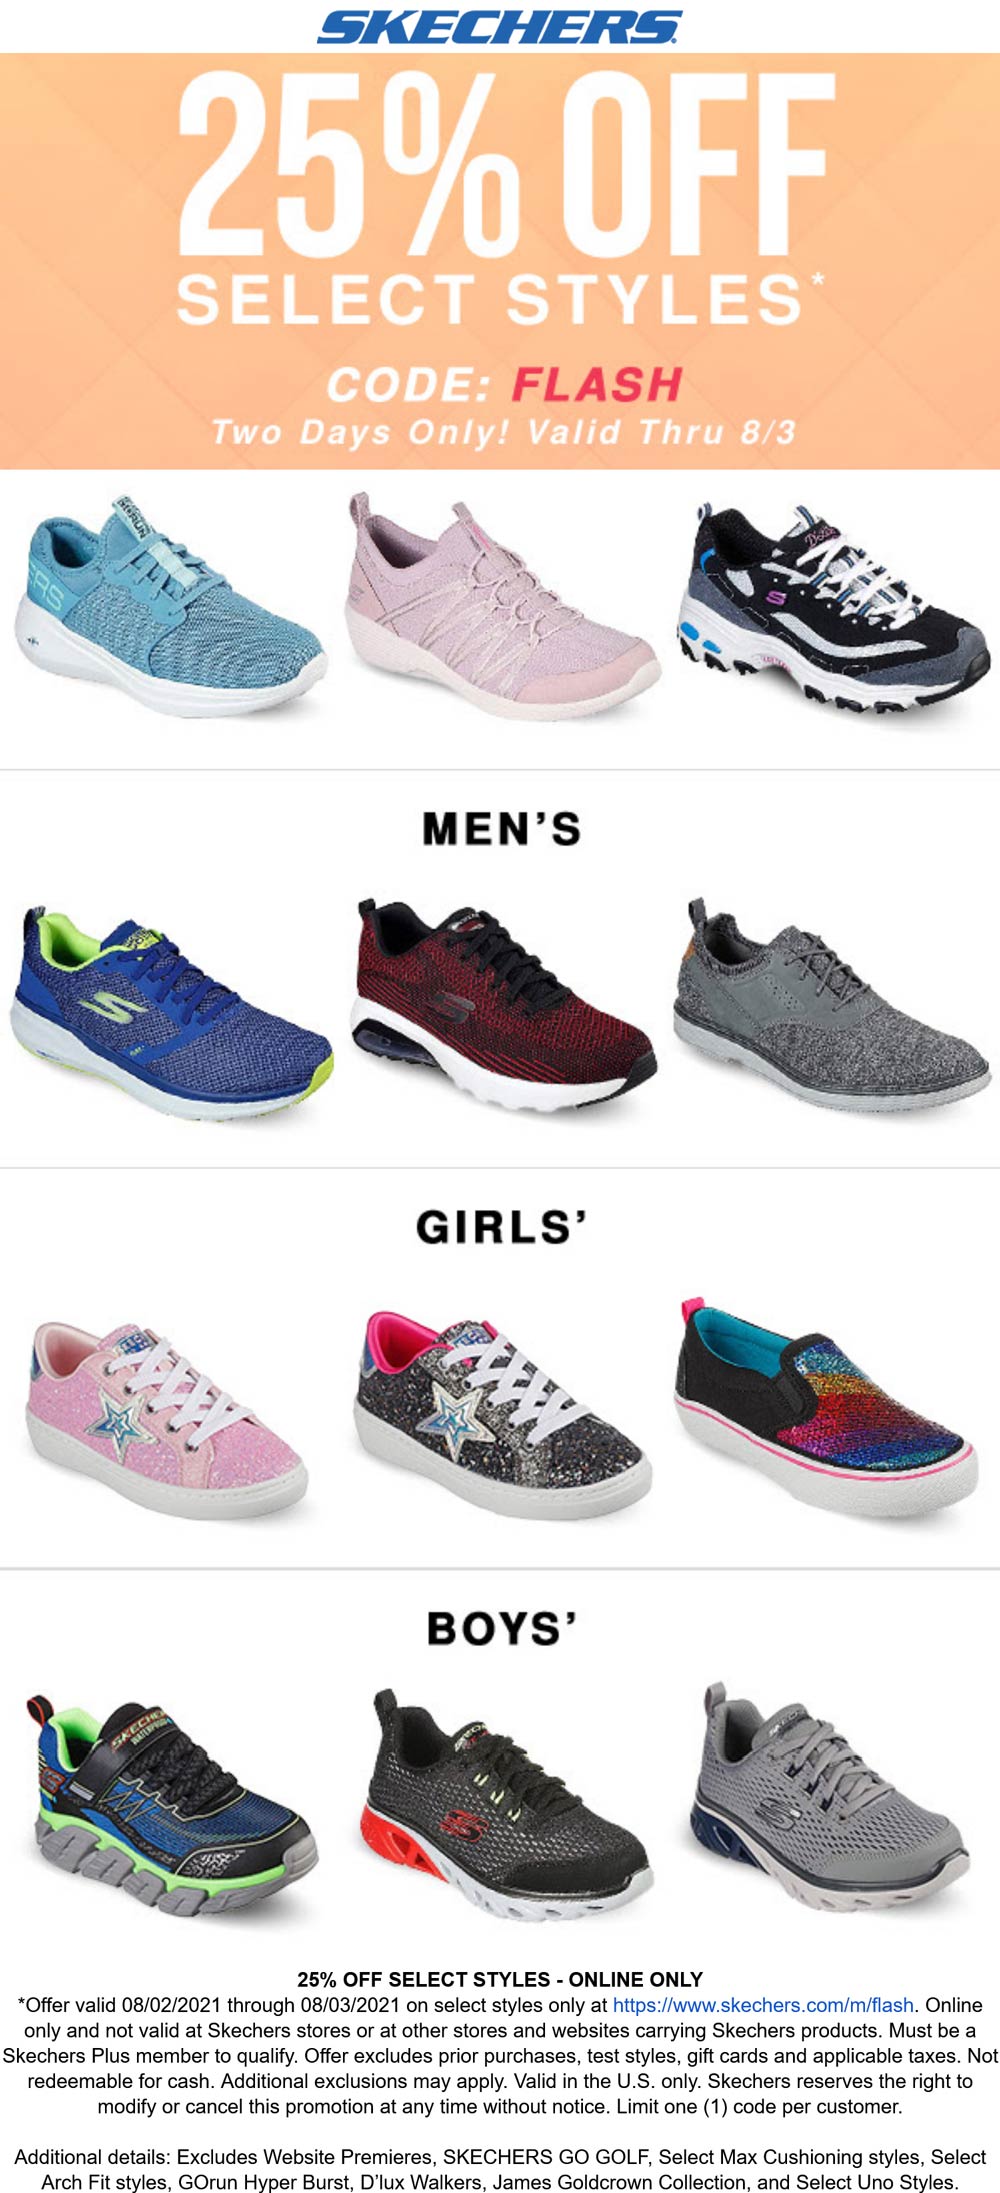 Skechers stores Coupon  25% off shoes online at Skechers via promo code FLASH #skechers 